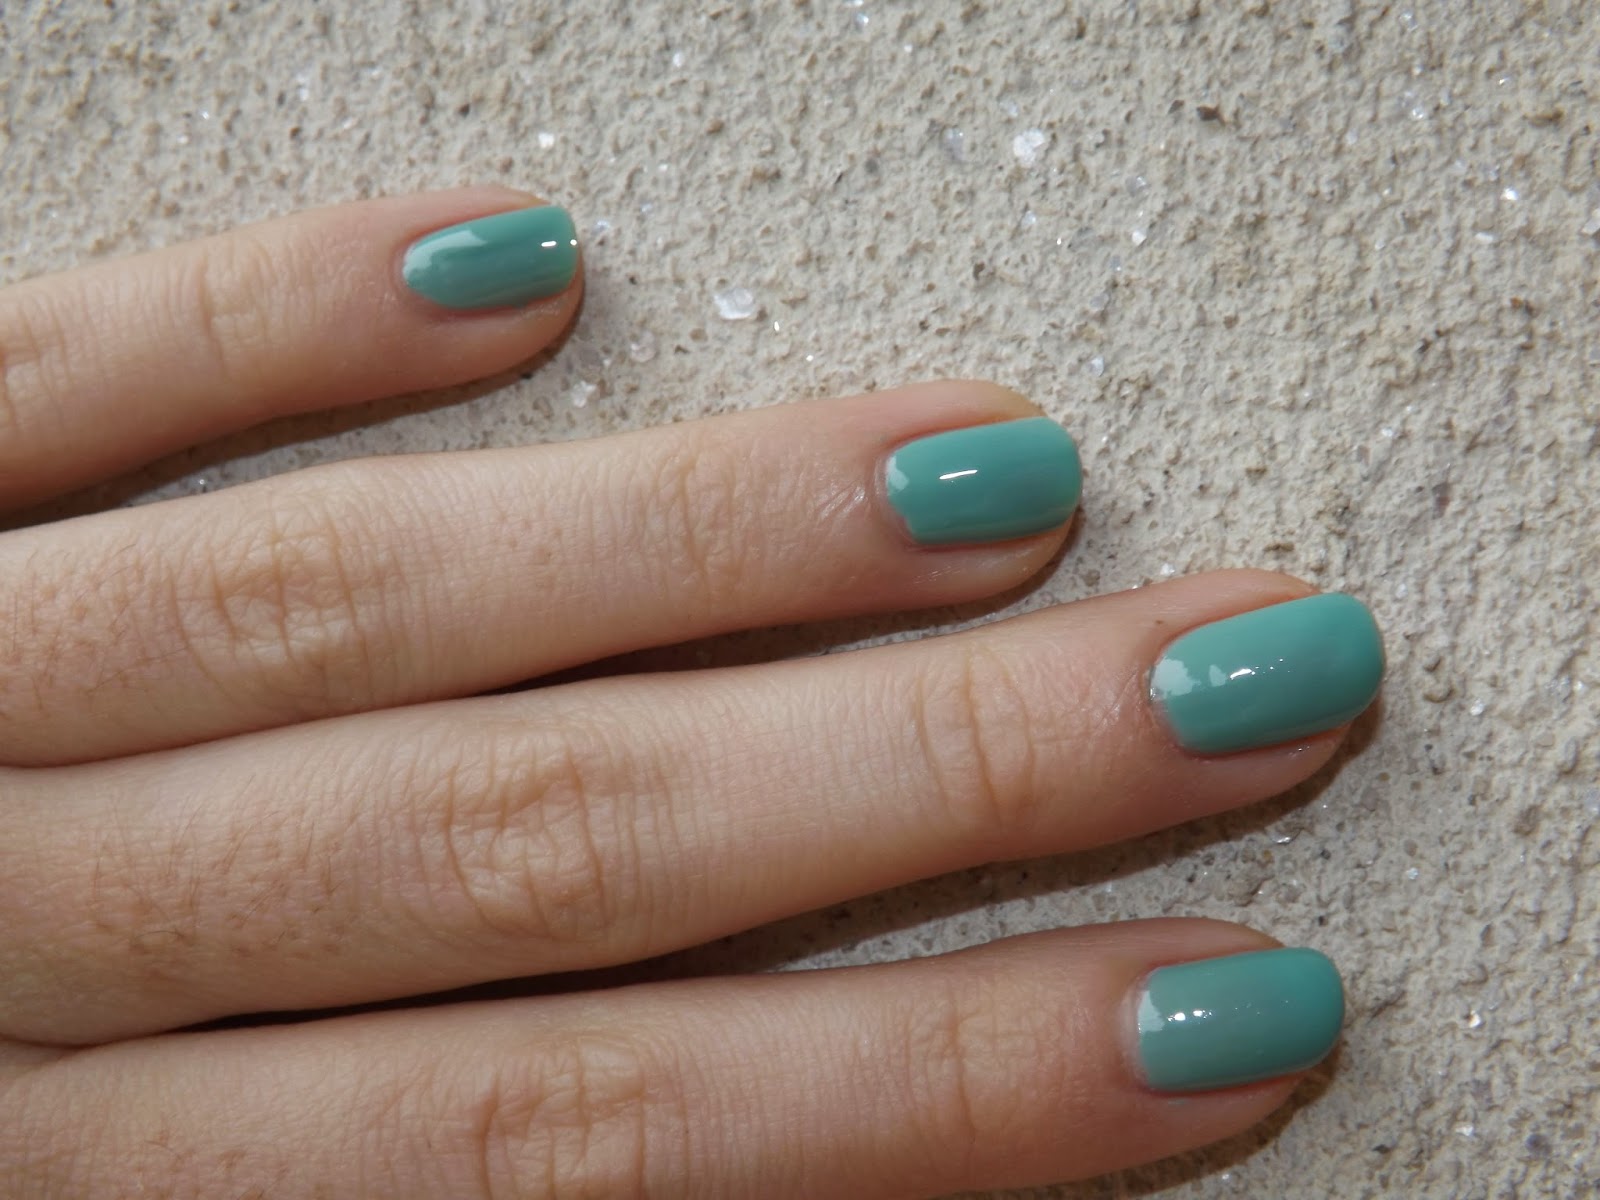 2. Essie Nail Polish in "Turquoise & Caicos" - wide 1